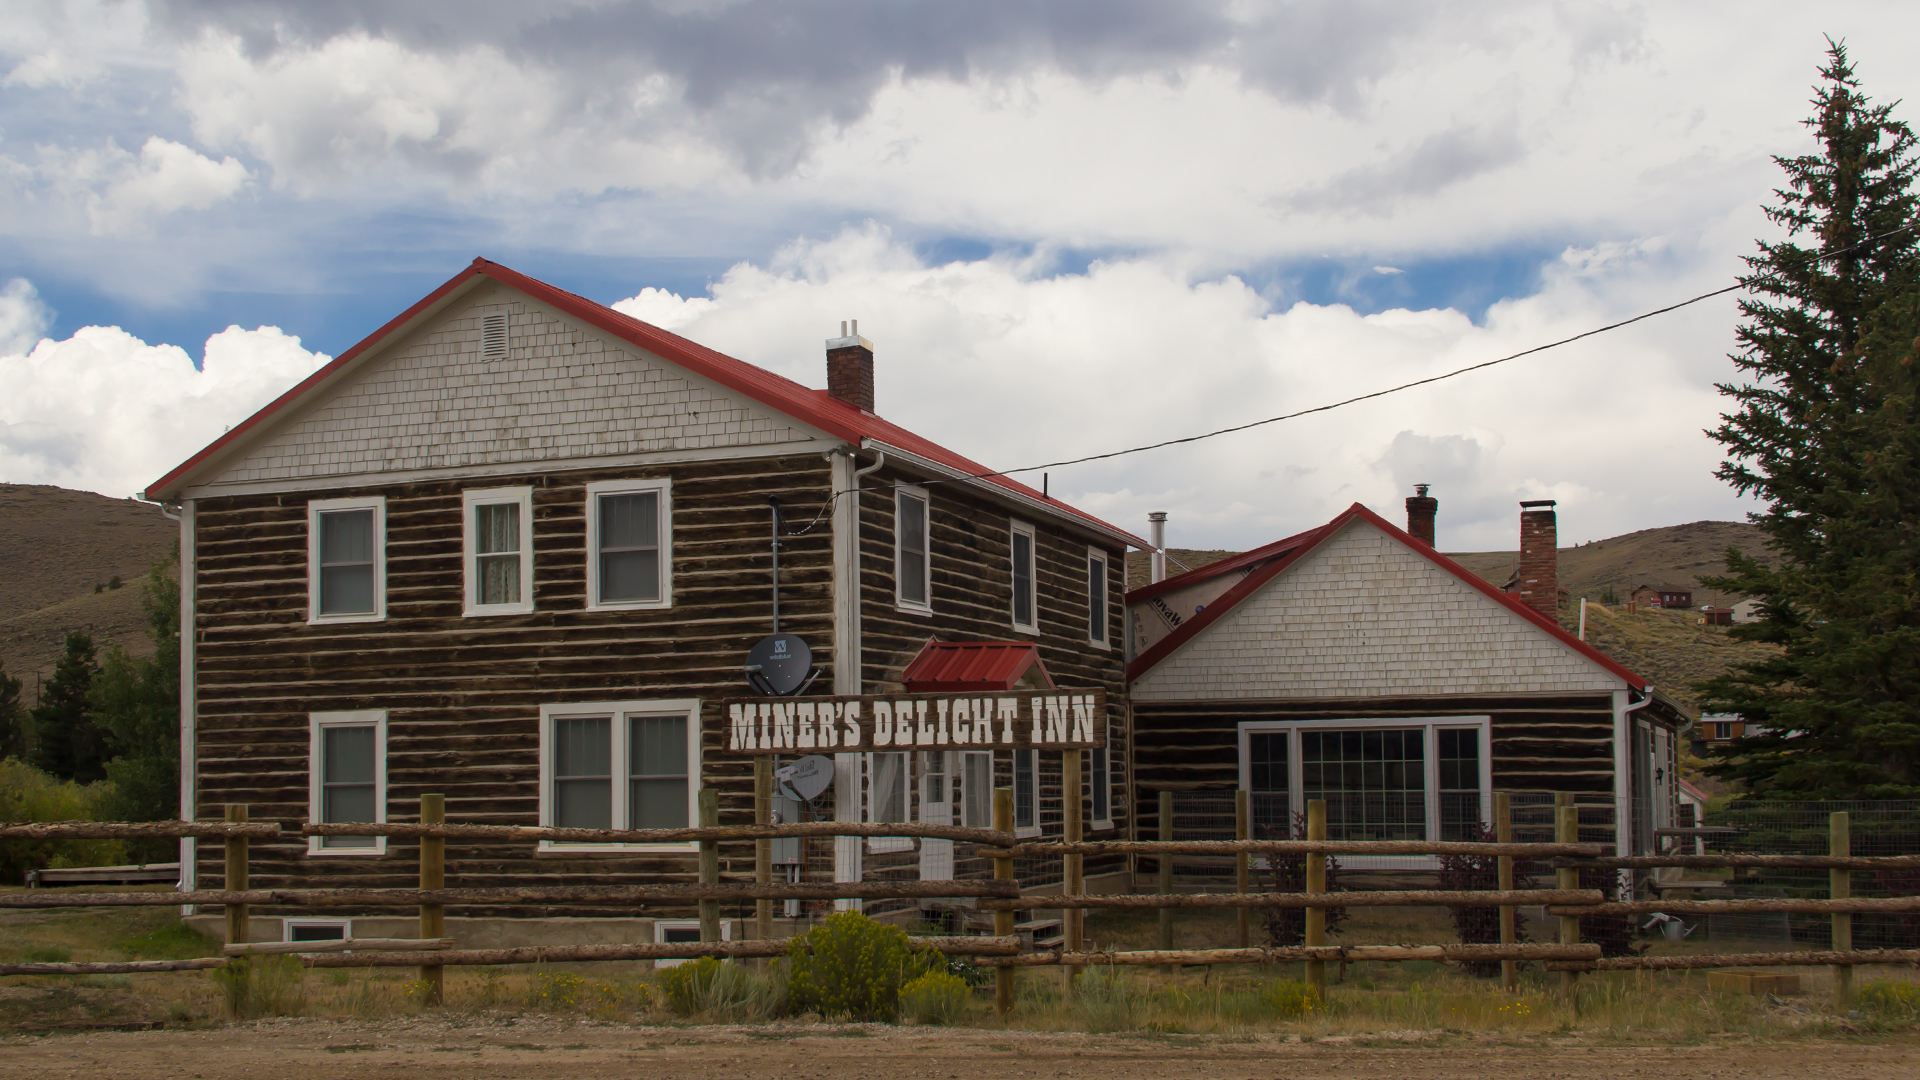 The Miner's Delight Inn in Atlantic City, Wyoming. Image ©2013 by Mark Gillespie.